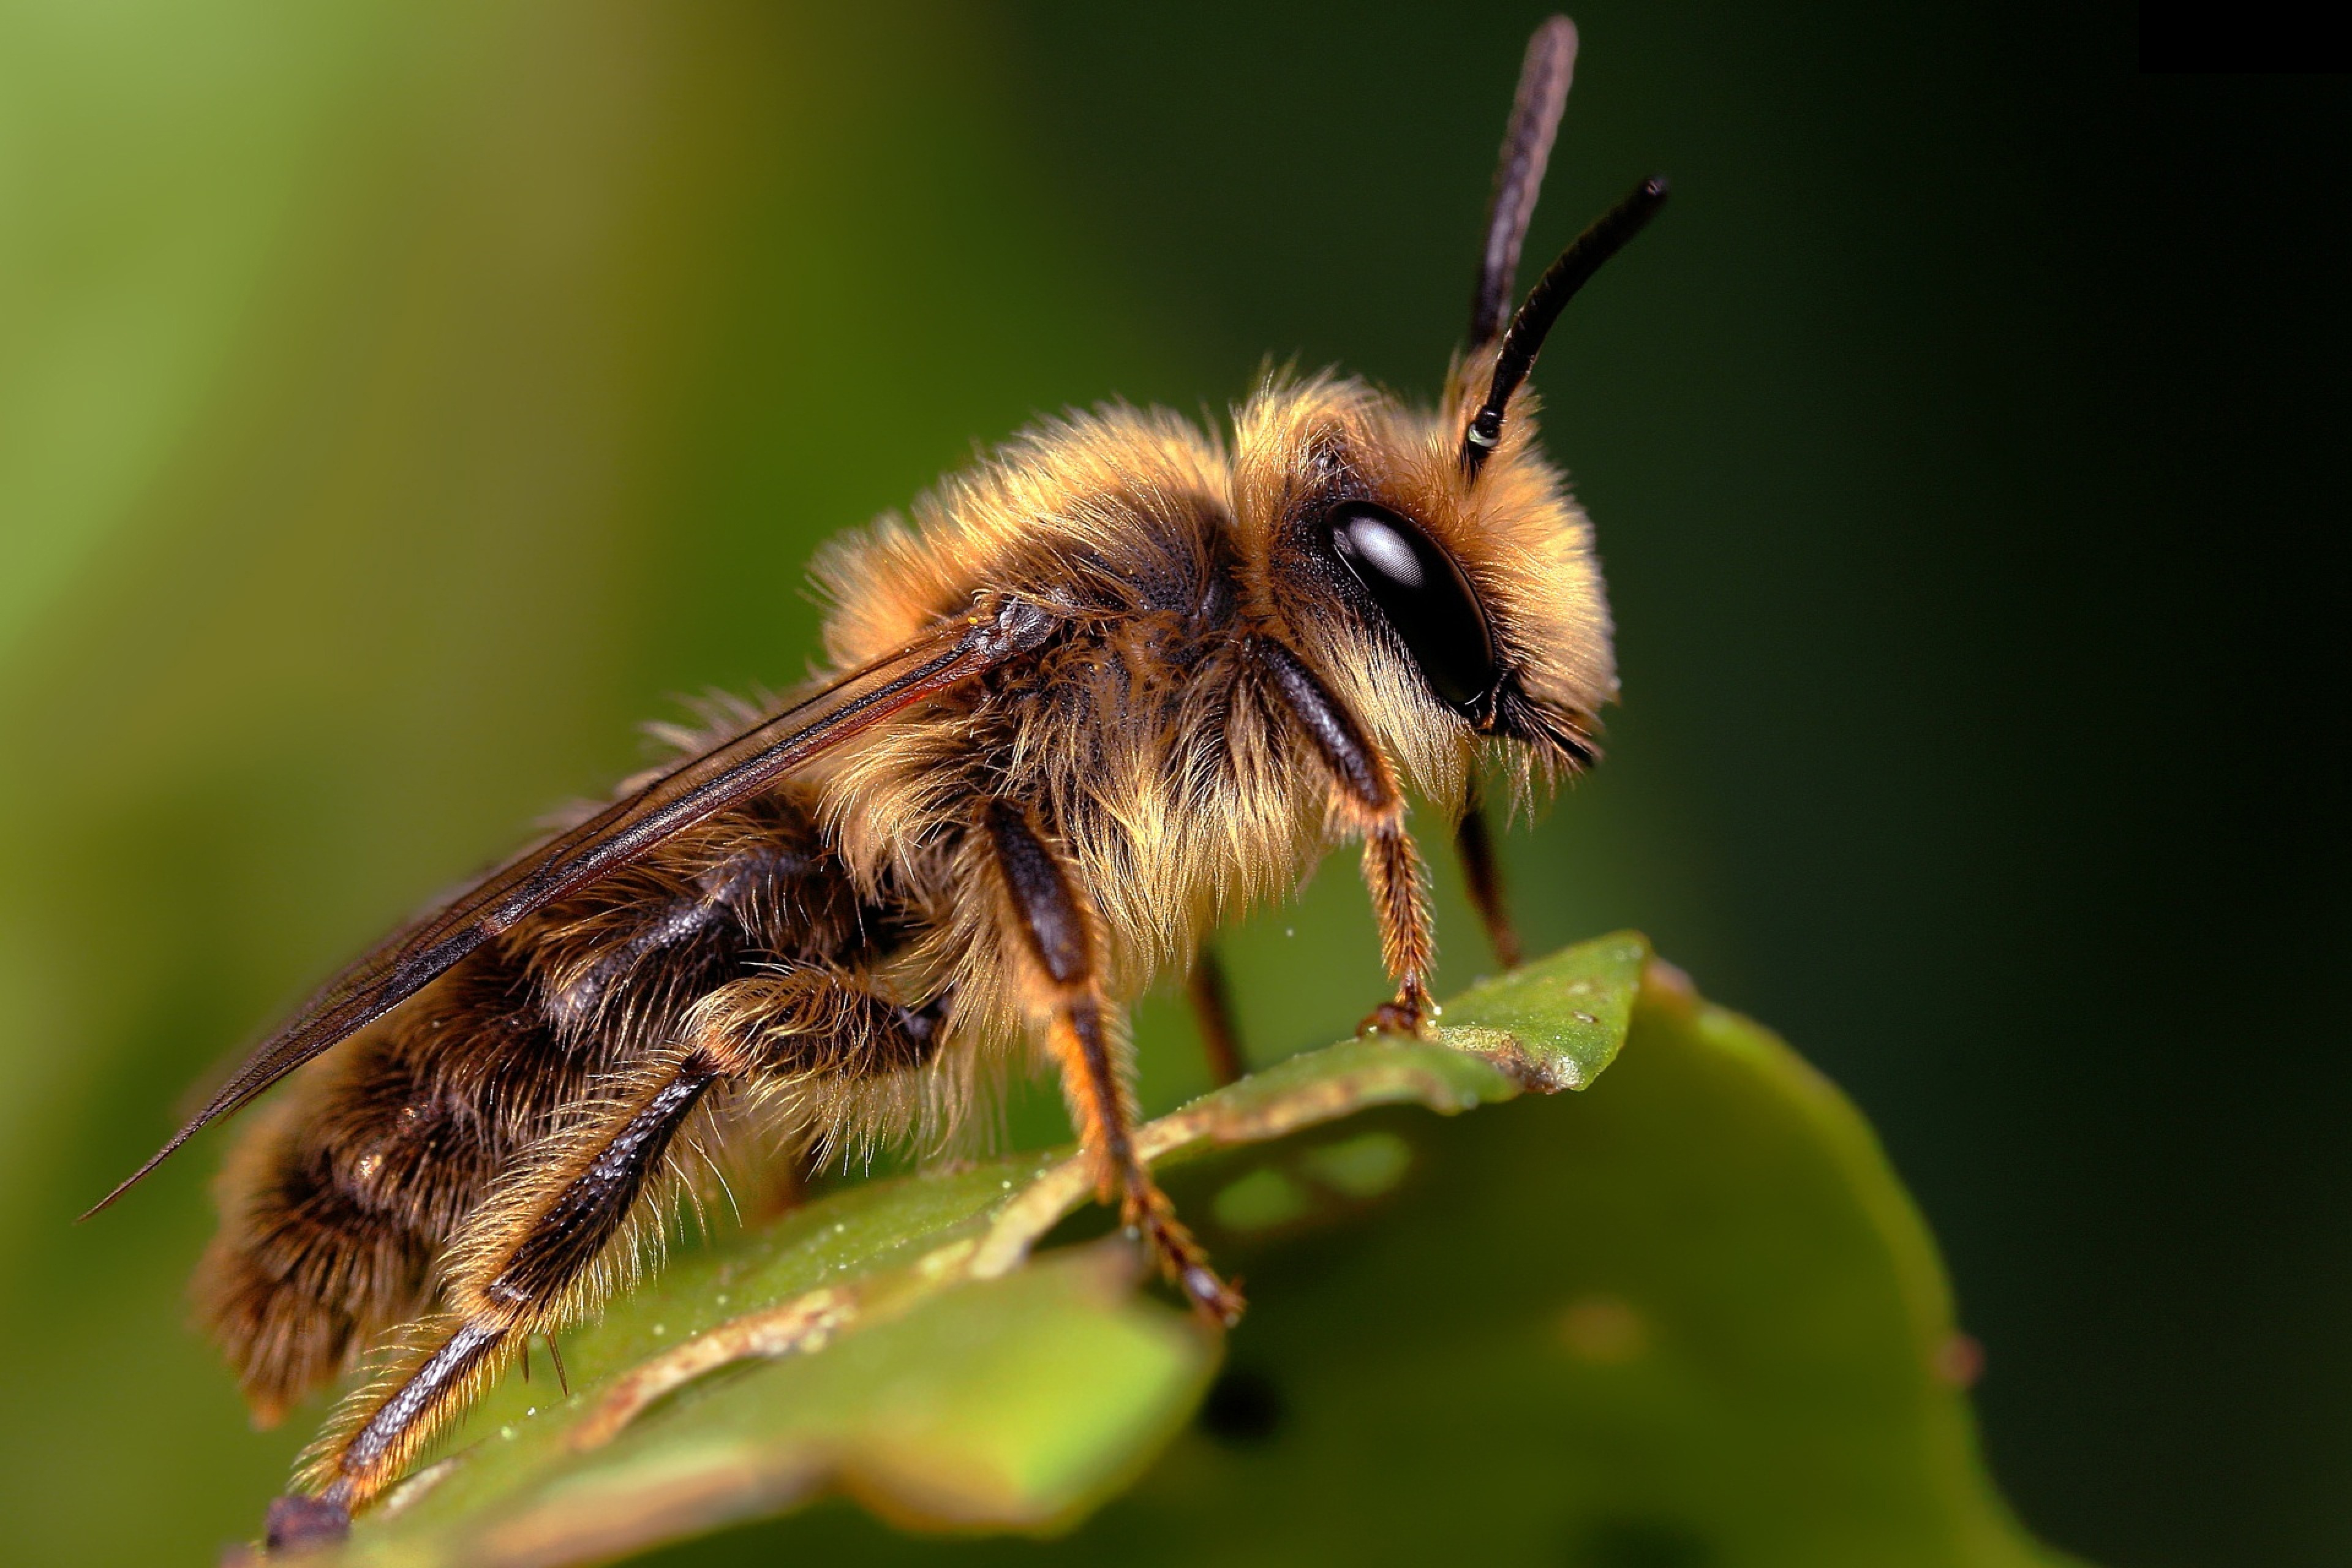 Image: Bee, macro, hairs, insect, leaf